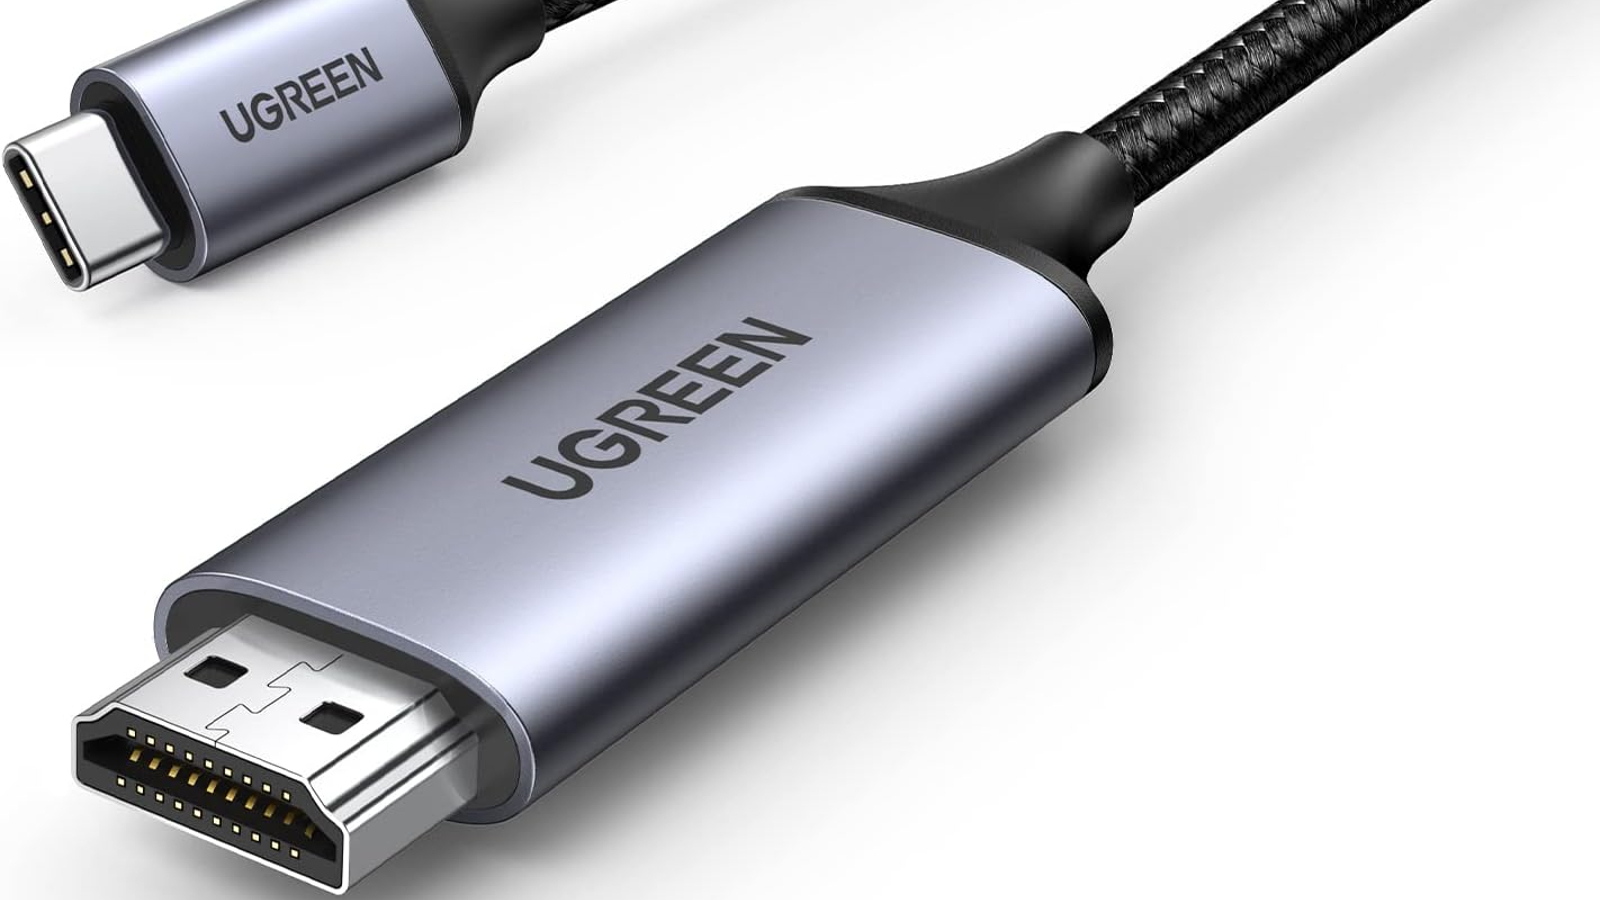 UGreen USB-C to HDMI Cable - Best for PC and monitor connections